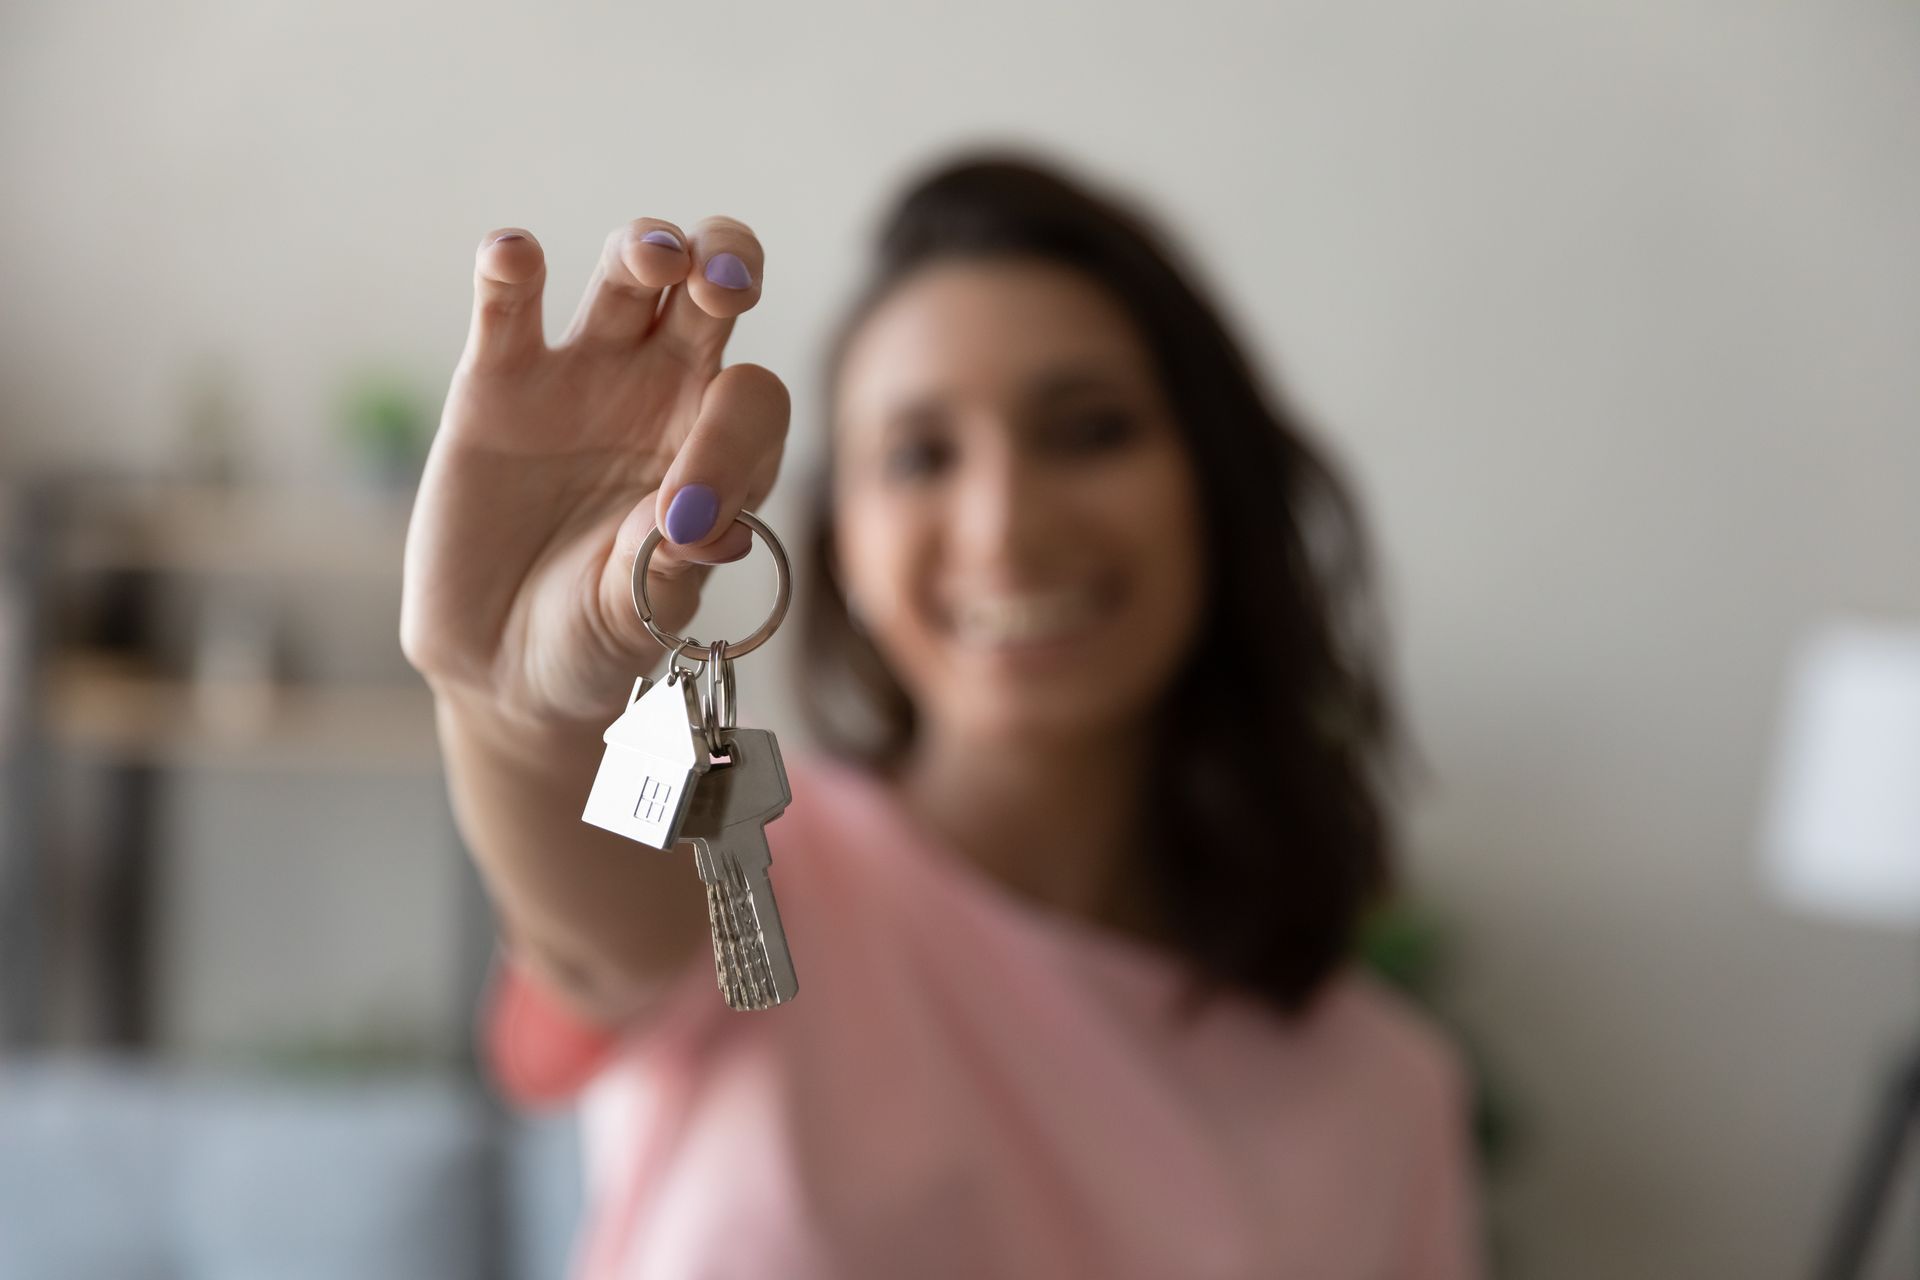 a woman in a pink shirt is holding up a set of house keys